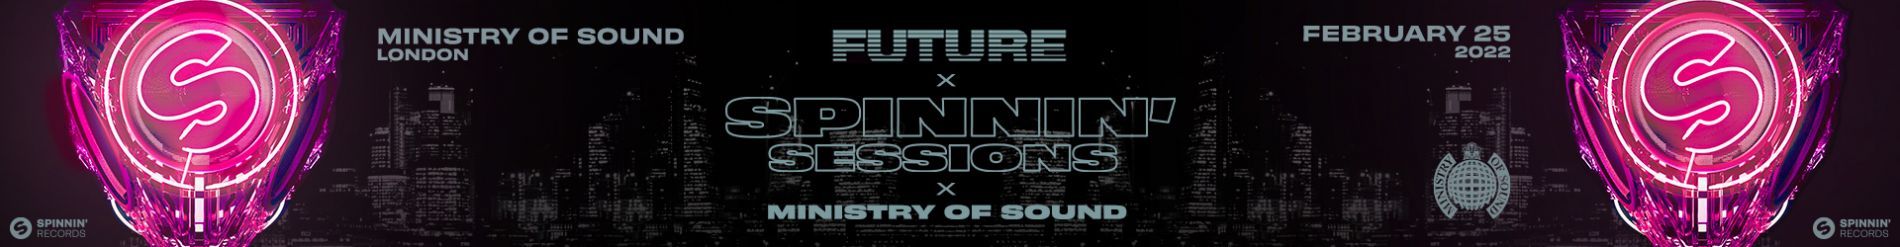 Spinnin' Sessions Spinnin' Sessions | Ministry of Sound